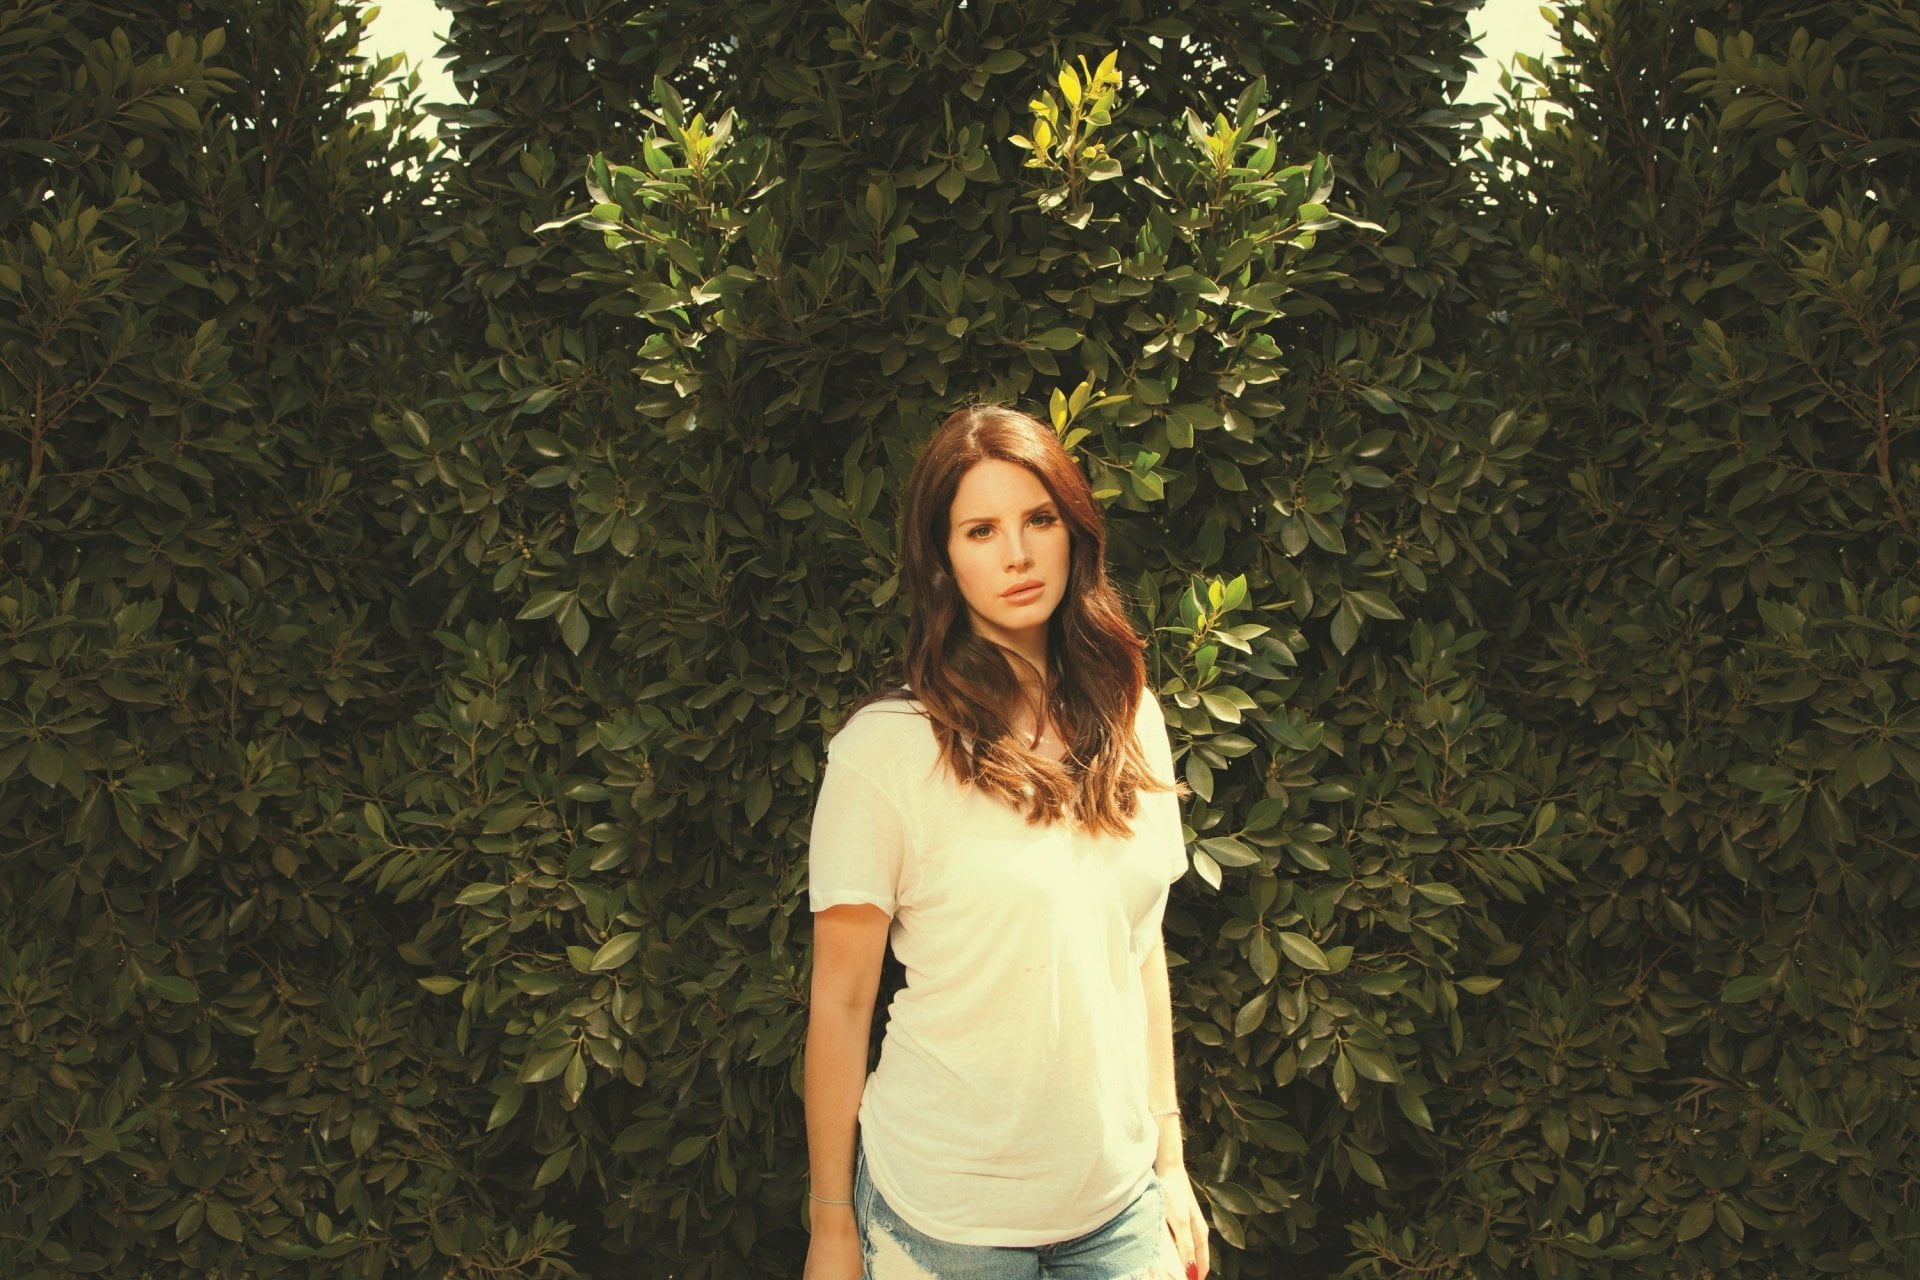 Singers, Lana Del Rey, standing, young adult, young women, one person